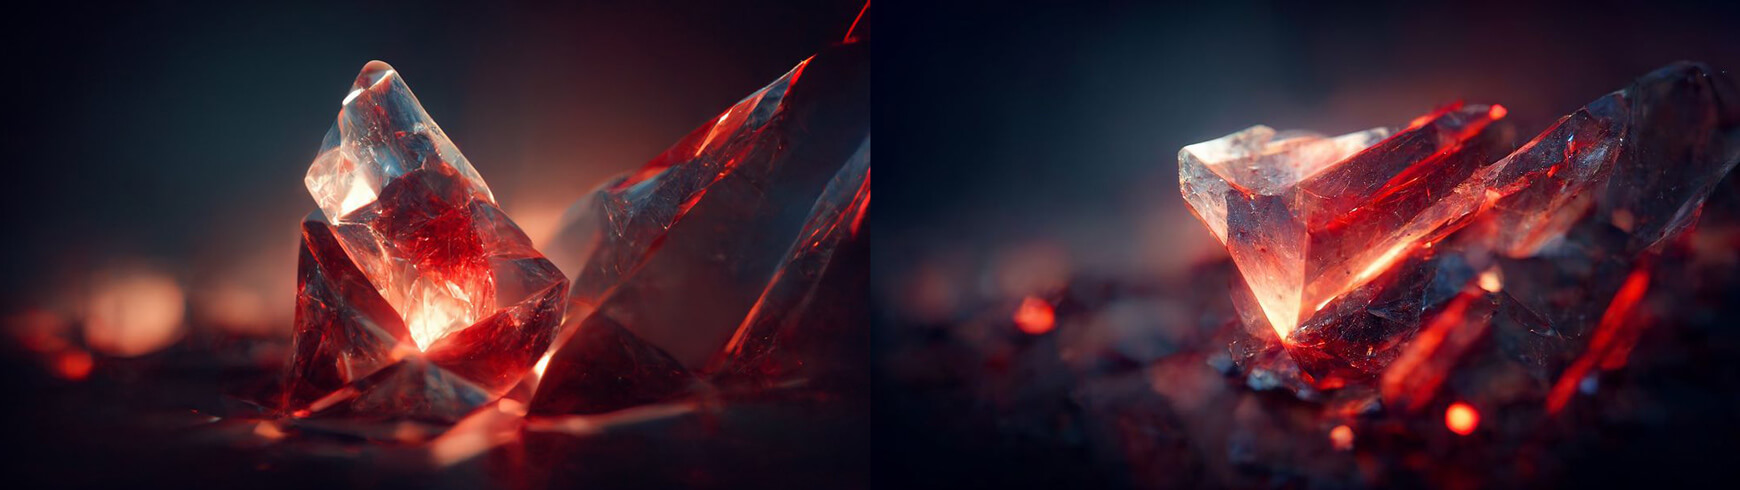 Unreal Engine Materials Textures for Motion Graphics